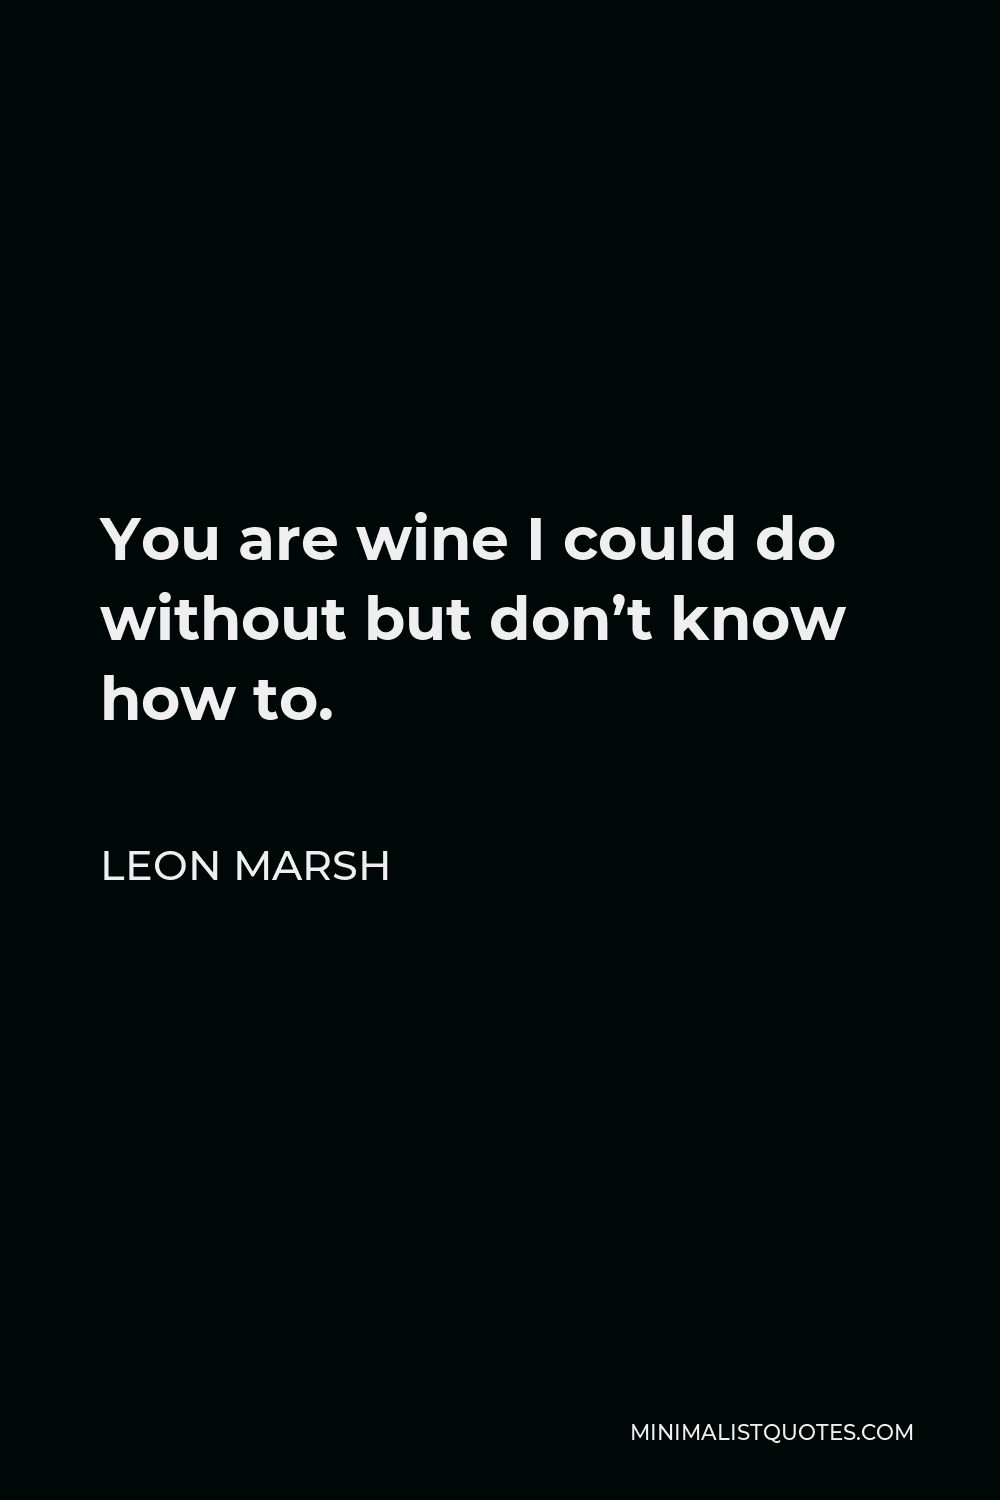 Leon Marsh Quote - You are wine I could do without but don’t know how to.